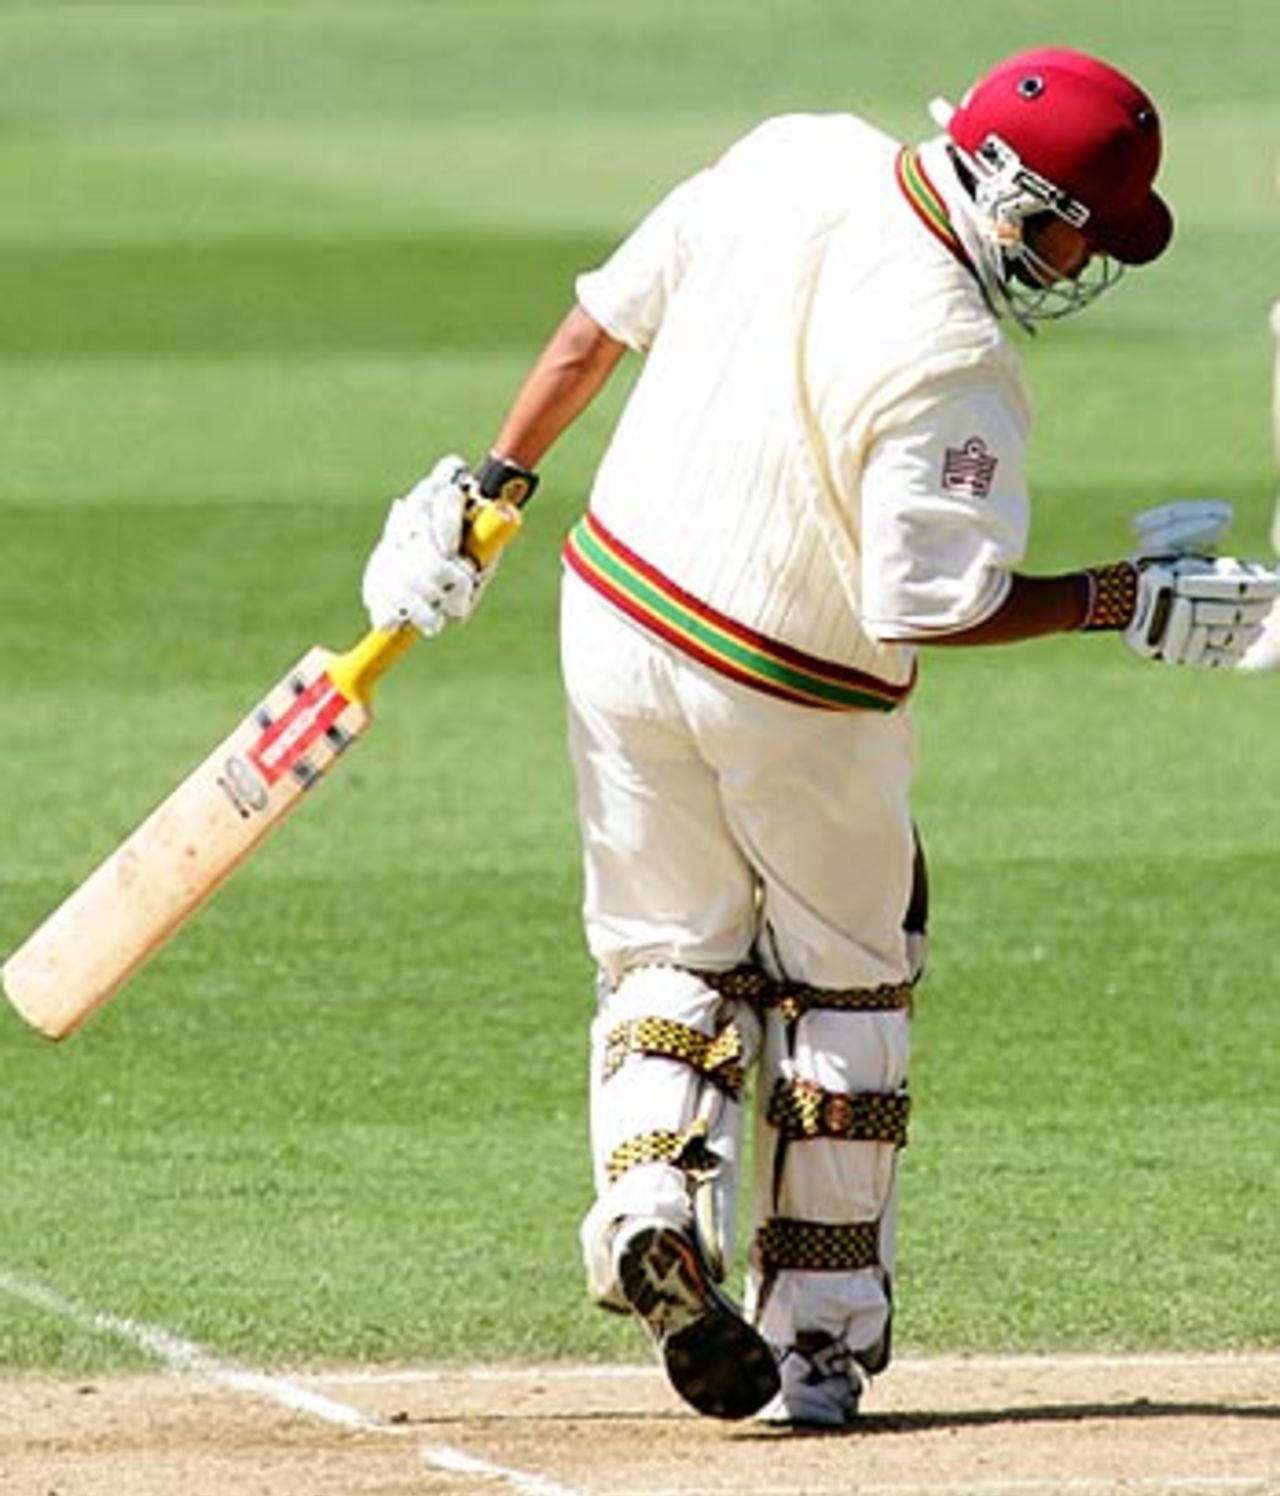 Ramnaresh Sarwan recoils after being hit in the head by a Shane Bond bouncer, New Zealand v West Indies, 1st Test, Auckland, 4th day, March 12, 2006